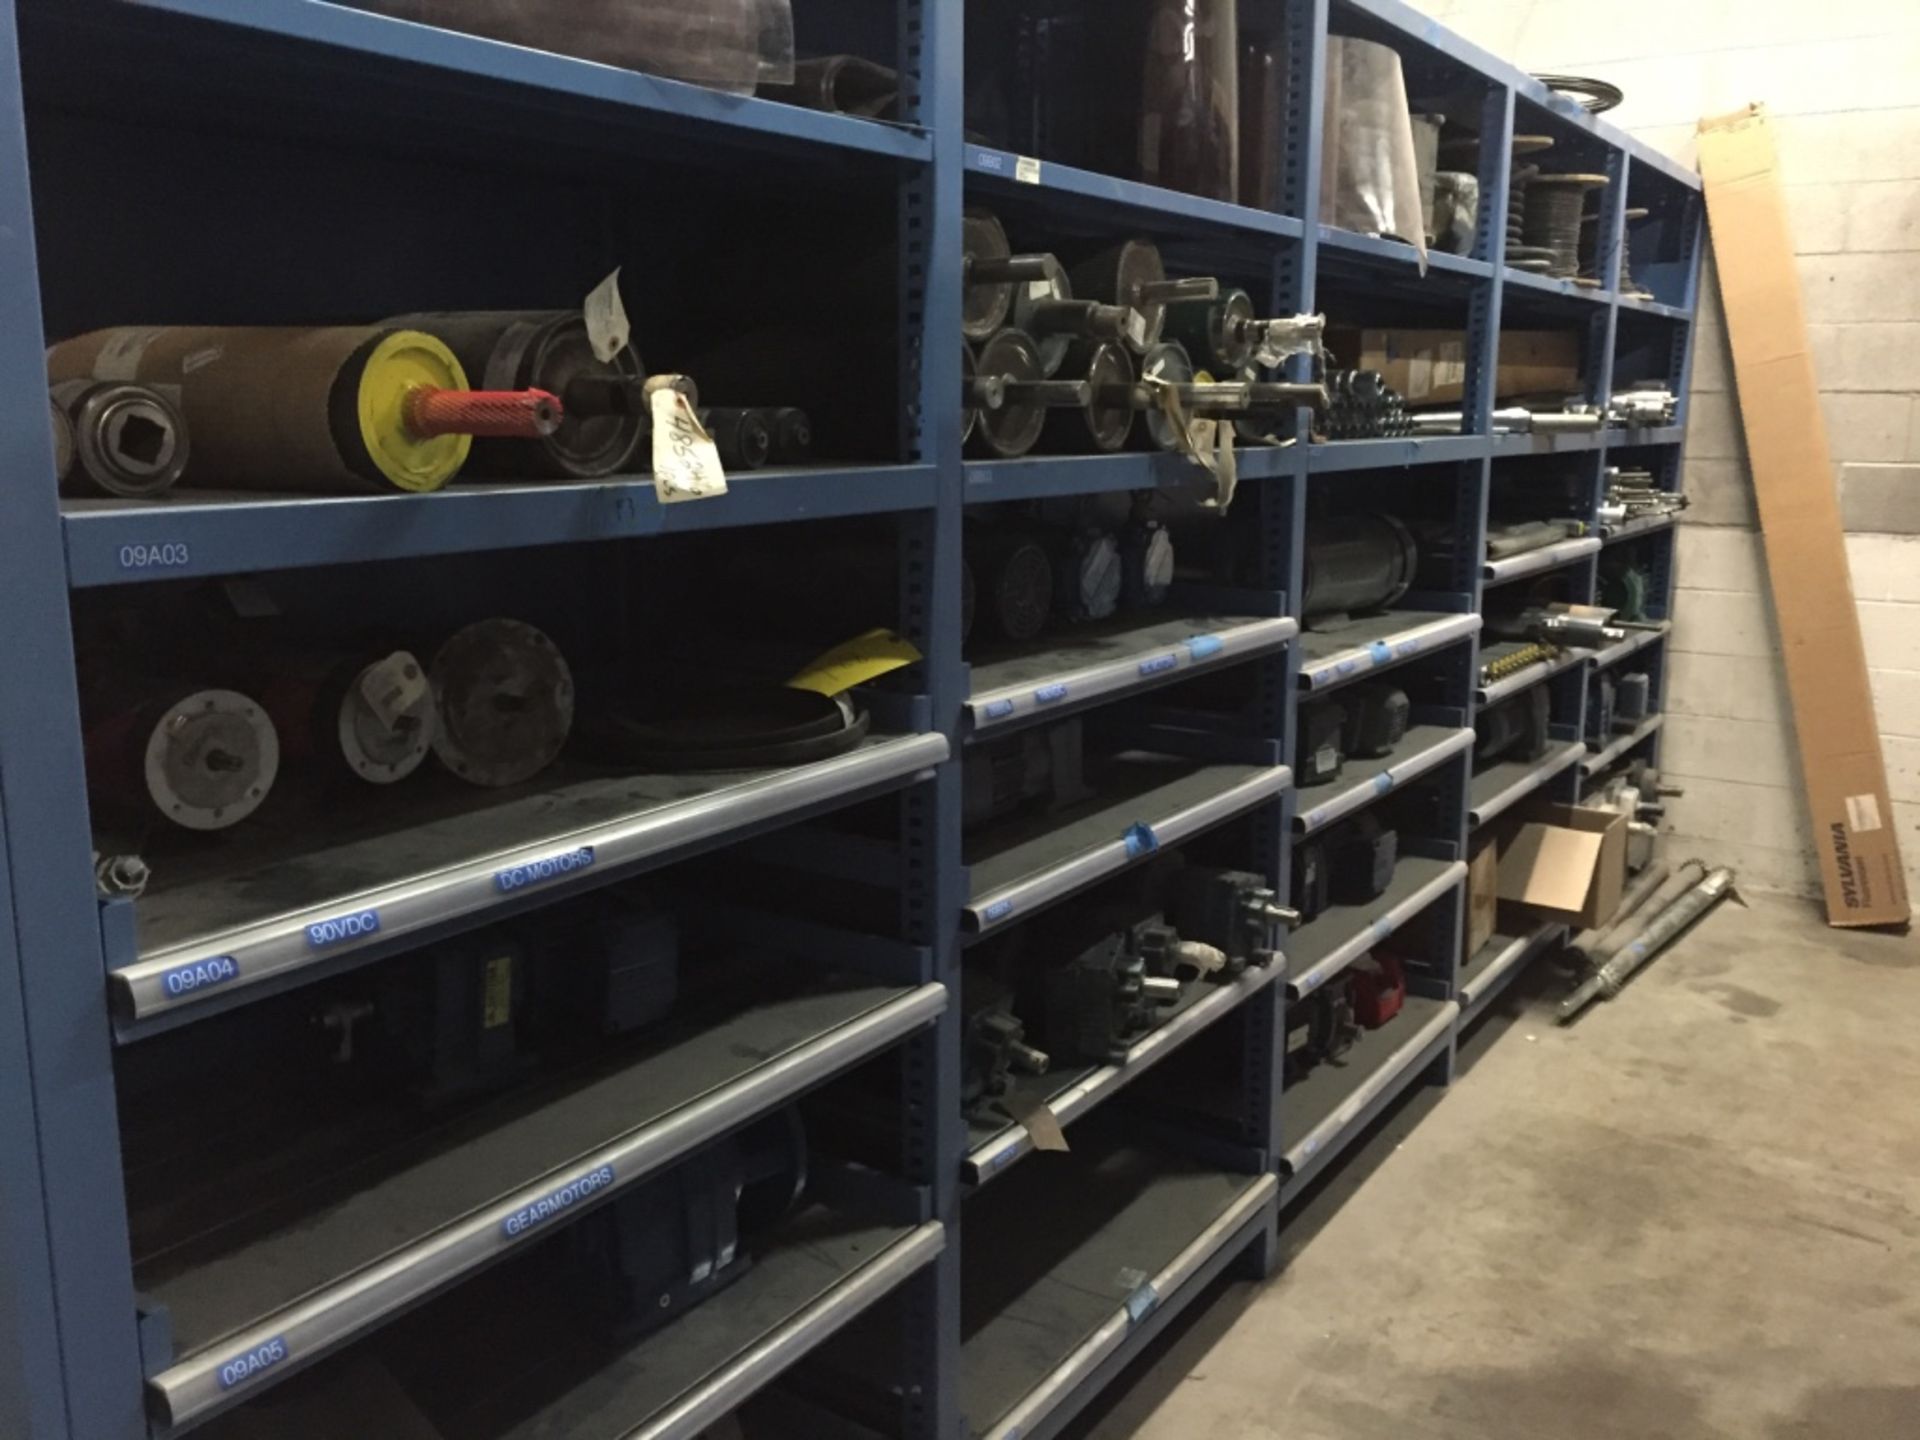 Lot of replacement Gearboxes and rollers for conveyors Shelf not included - Rigging Fee $100, If Cra